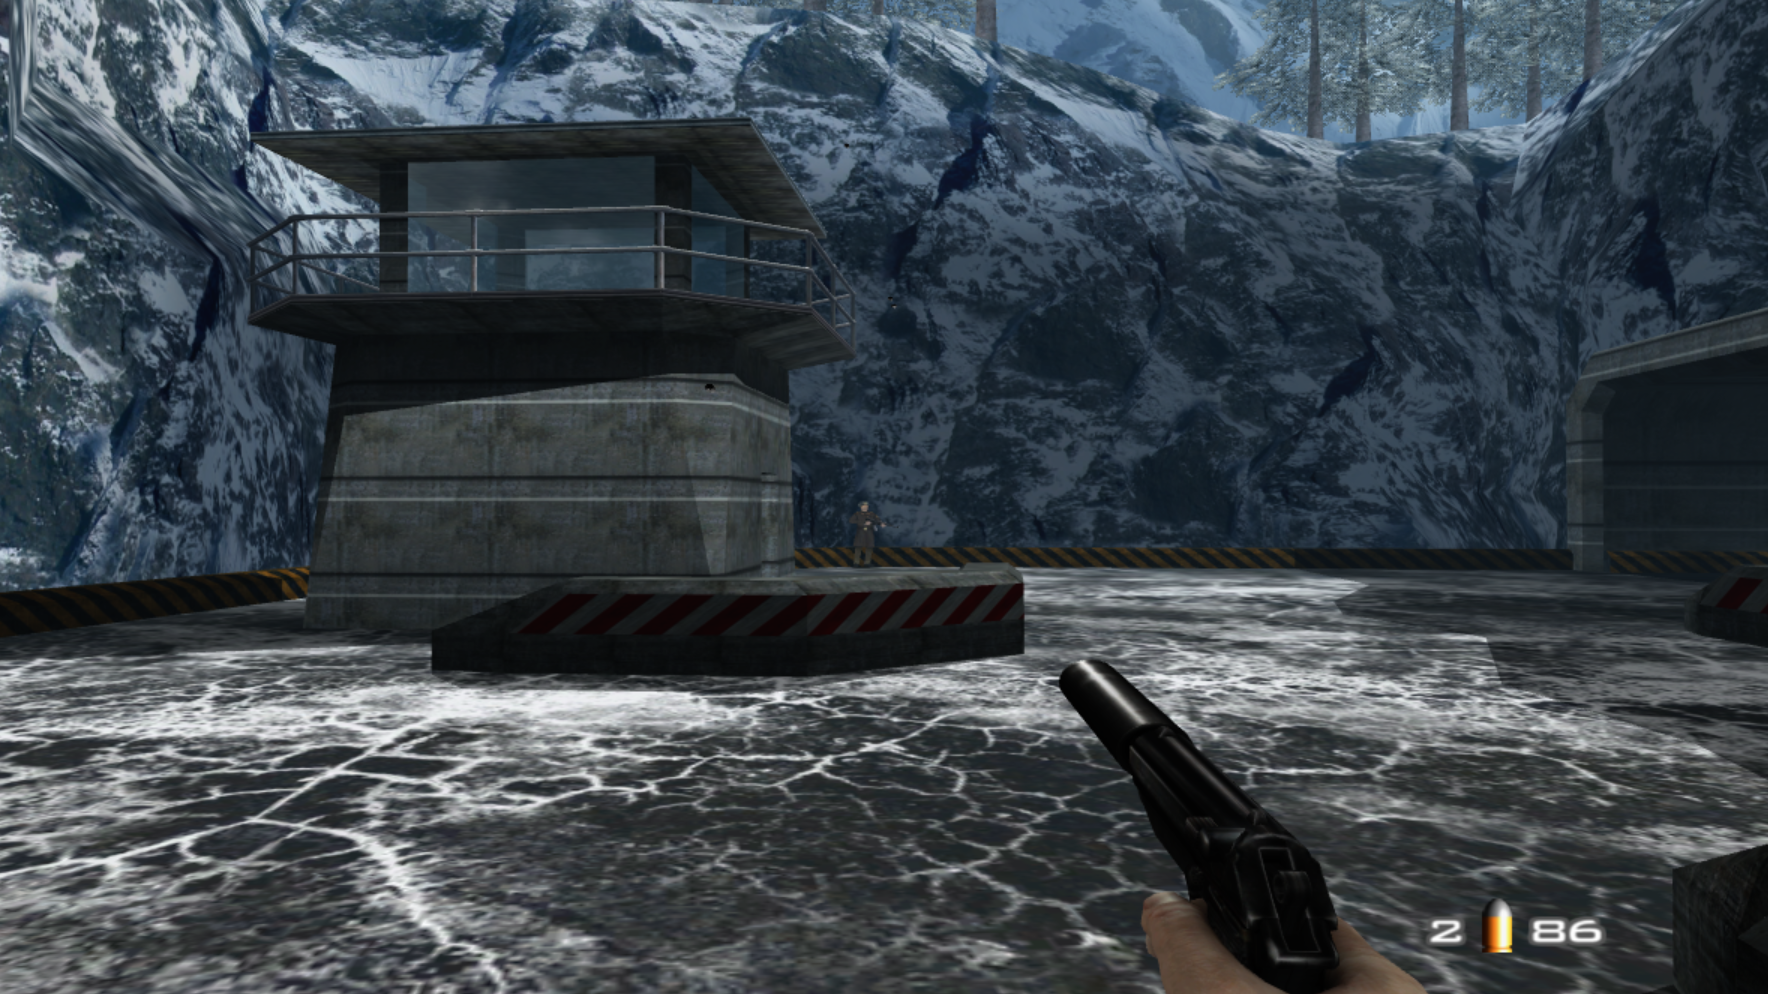 How to Play the Leaked ‘GoldenEye’ Remake